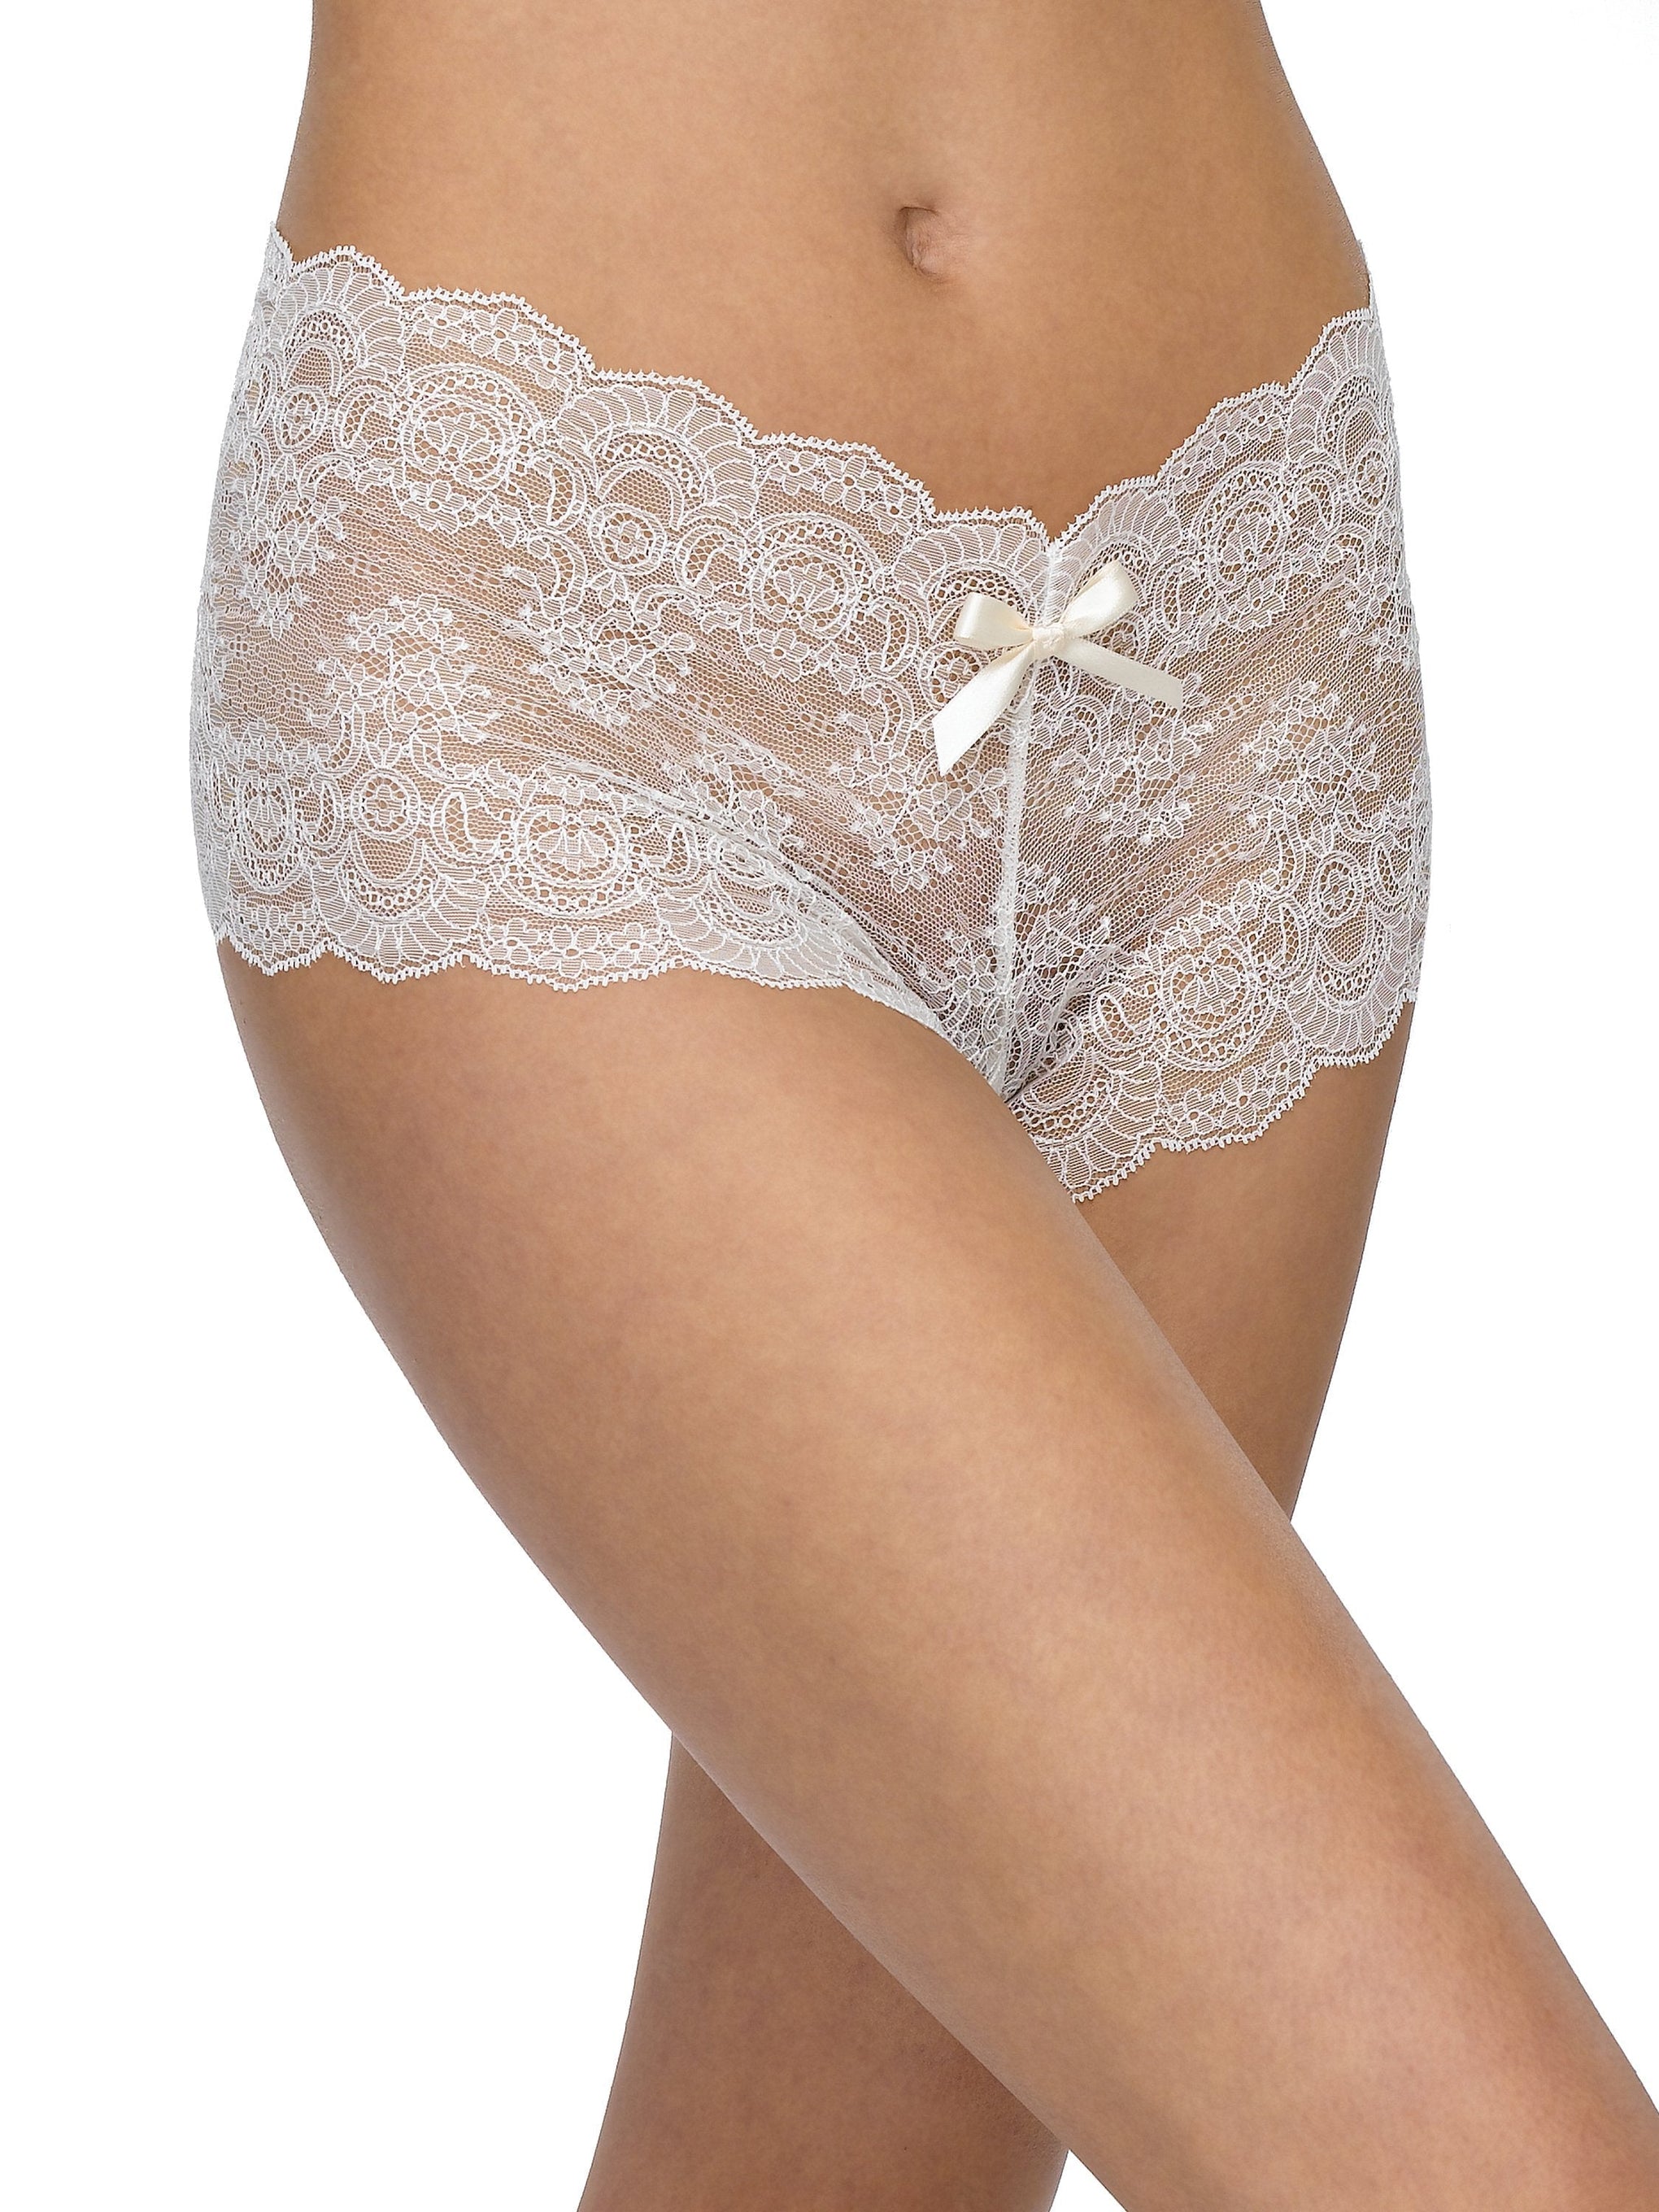 Come Through Lace Crotchless Panty - White